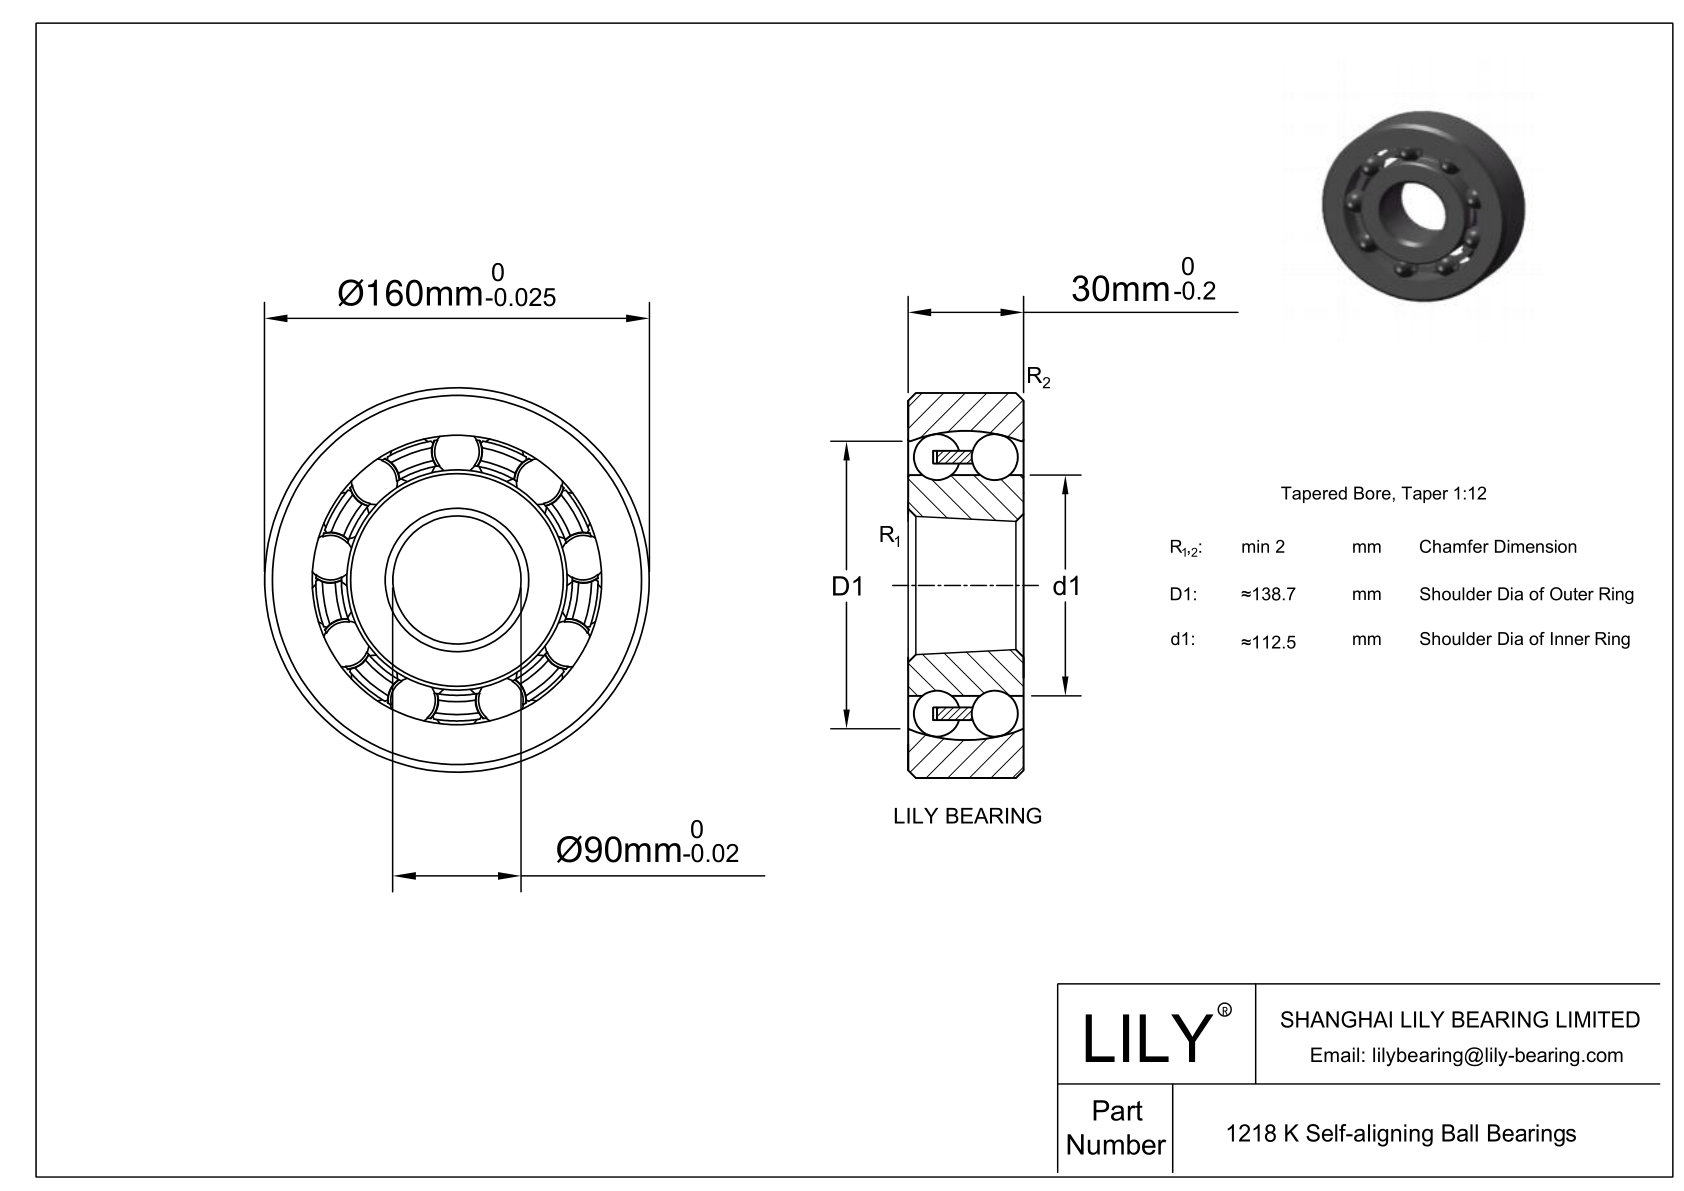 S1218 K Stainless Steel Self Aligning Ball Bearings cad drawing